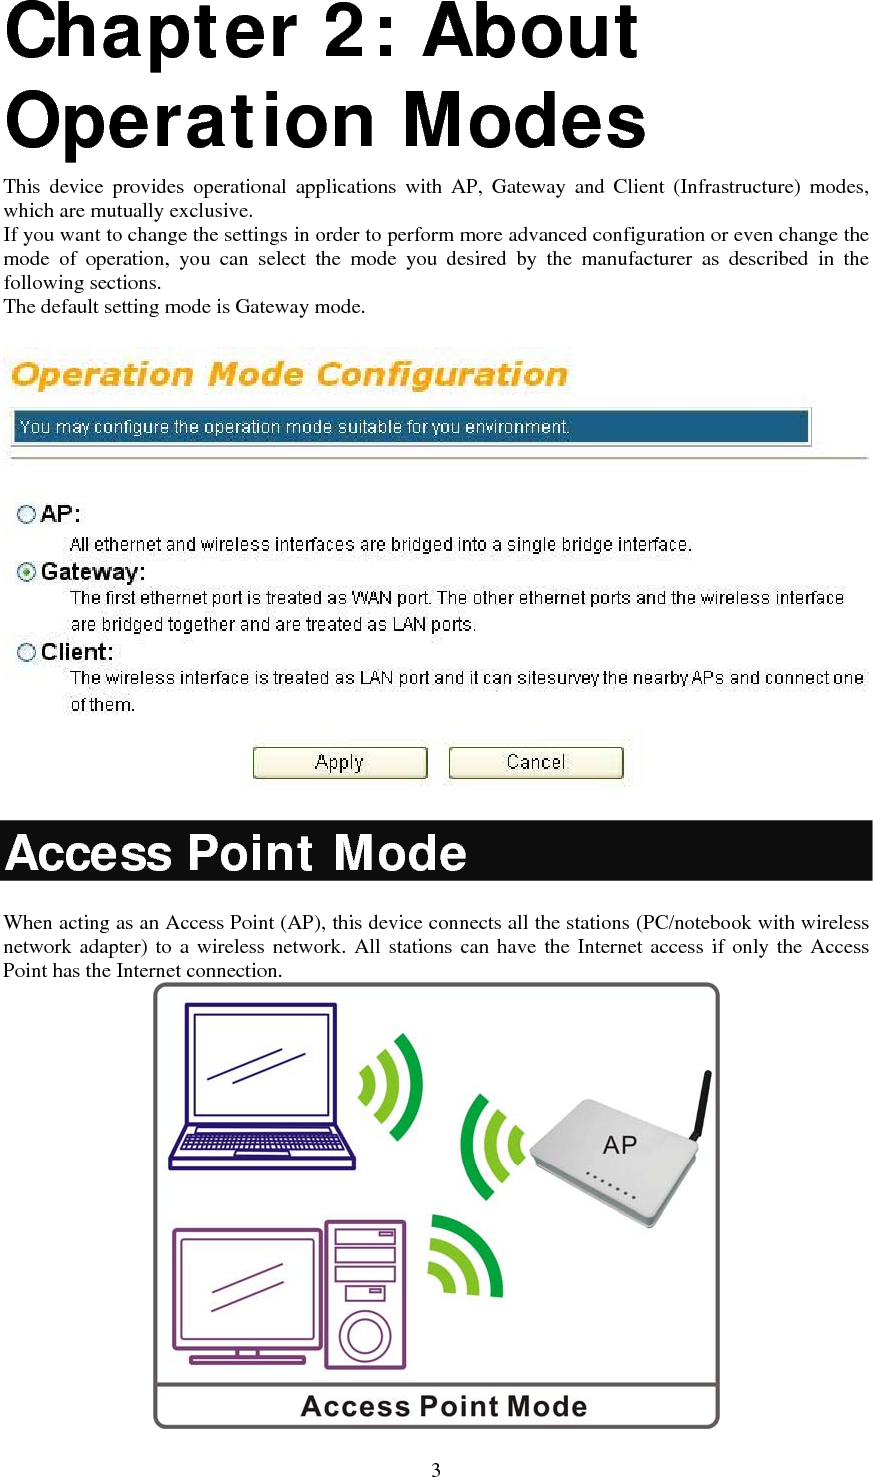   3Chapter 2: About Operation Modes  This device provides operational applications with AP, Gateway and Client (Infrastructure) modes, which are mutually exclusive.  If you want to change the settings in order to perform more advanced configuration or even change the mode of operation, you can select the mode you desired by the manufacturer as described in the following sections. The default setting mode is Gateway mode.  Access Point Mode When acting as an Access Point (AP), this device connects all the stations (PC/notebook with wireless network adapter) to a wireless network. All stations can have the Internet access if only the Access Point has the Internet connection.  